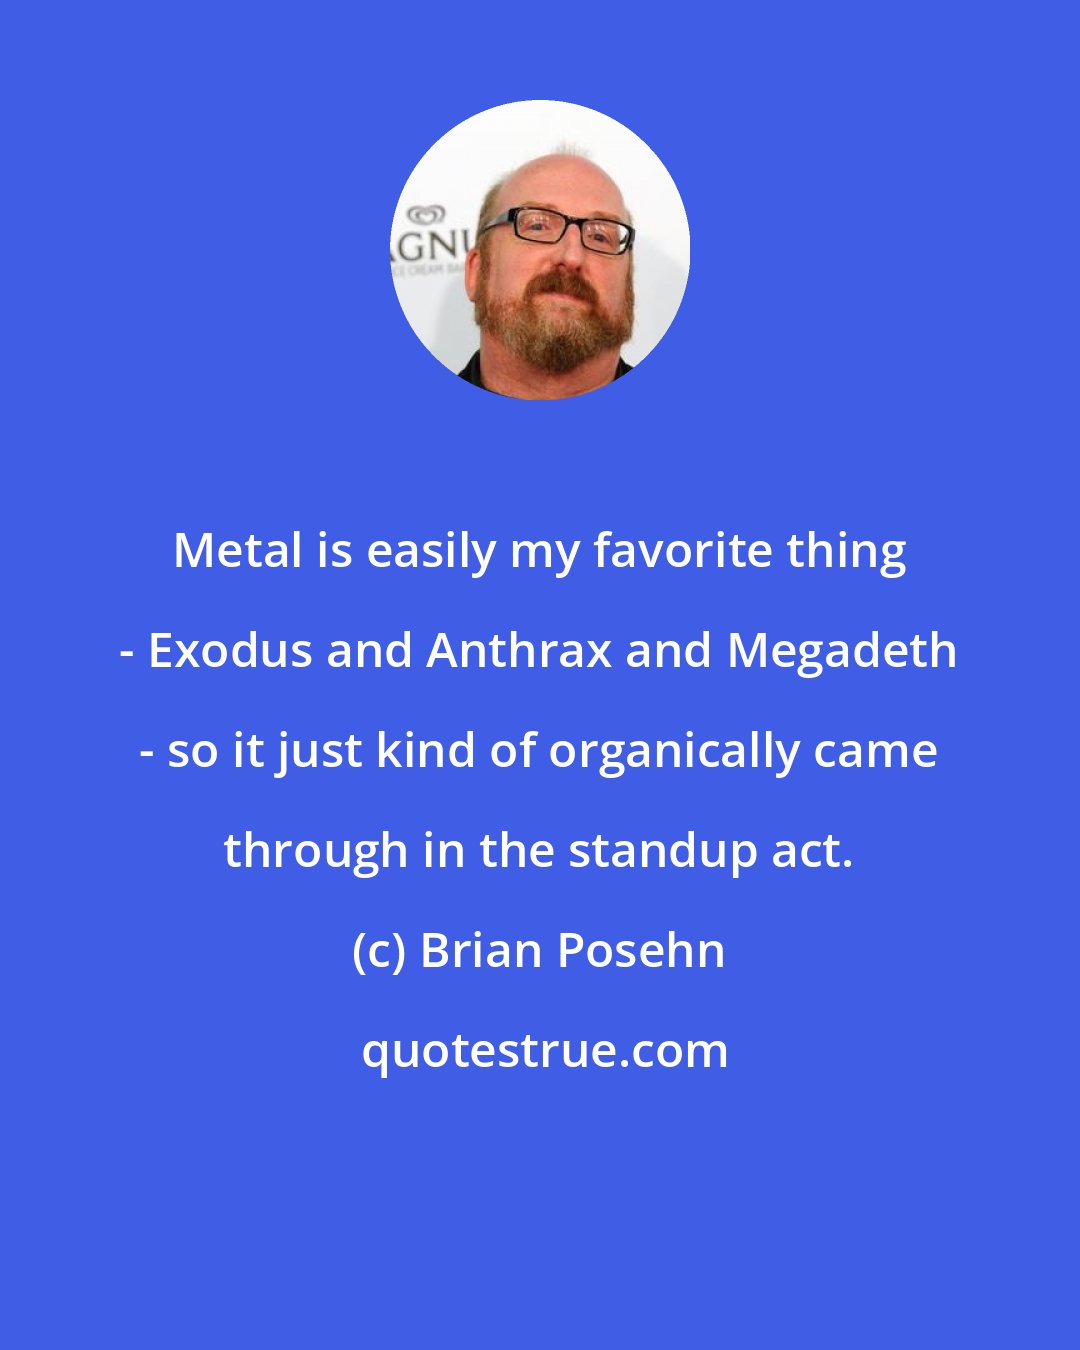 Brian Posehn: Metal is easily my favorite thing - Exodus and Anthrax and Megadeth - so it just kind of organically came through in the standup act.